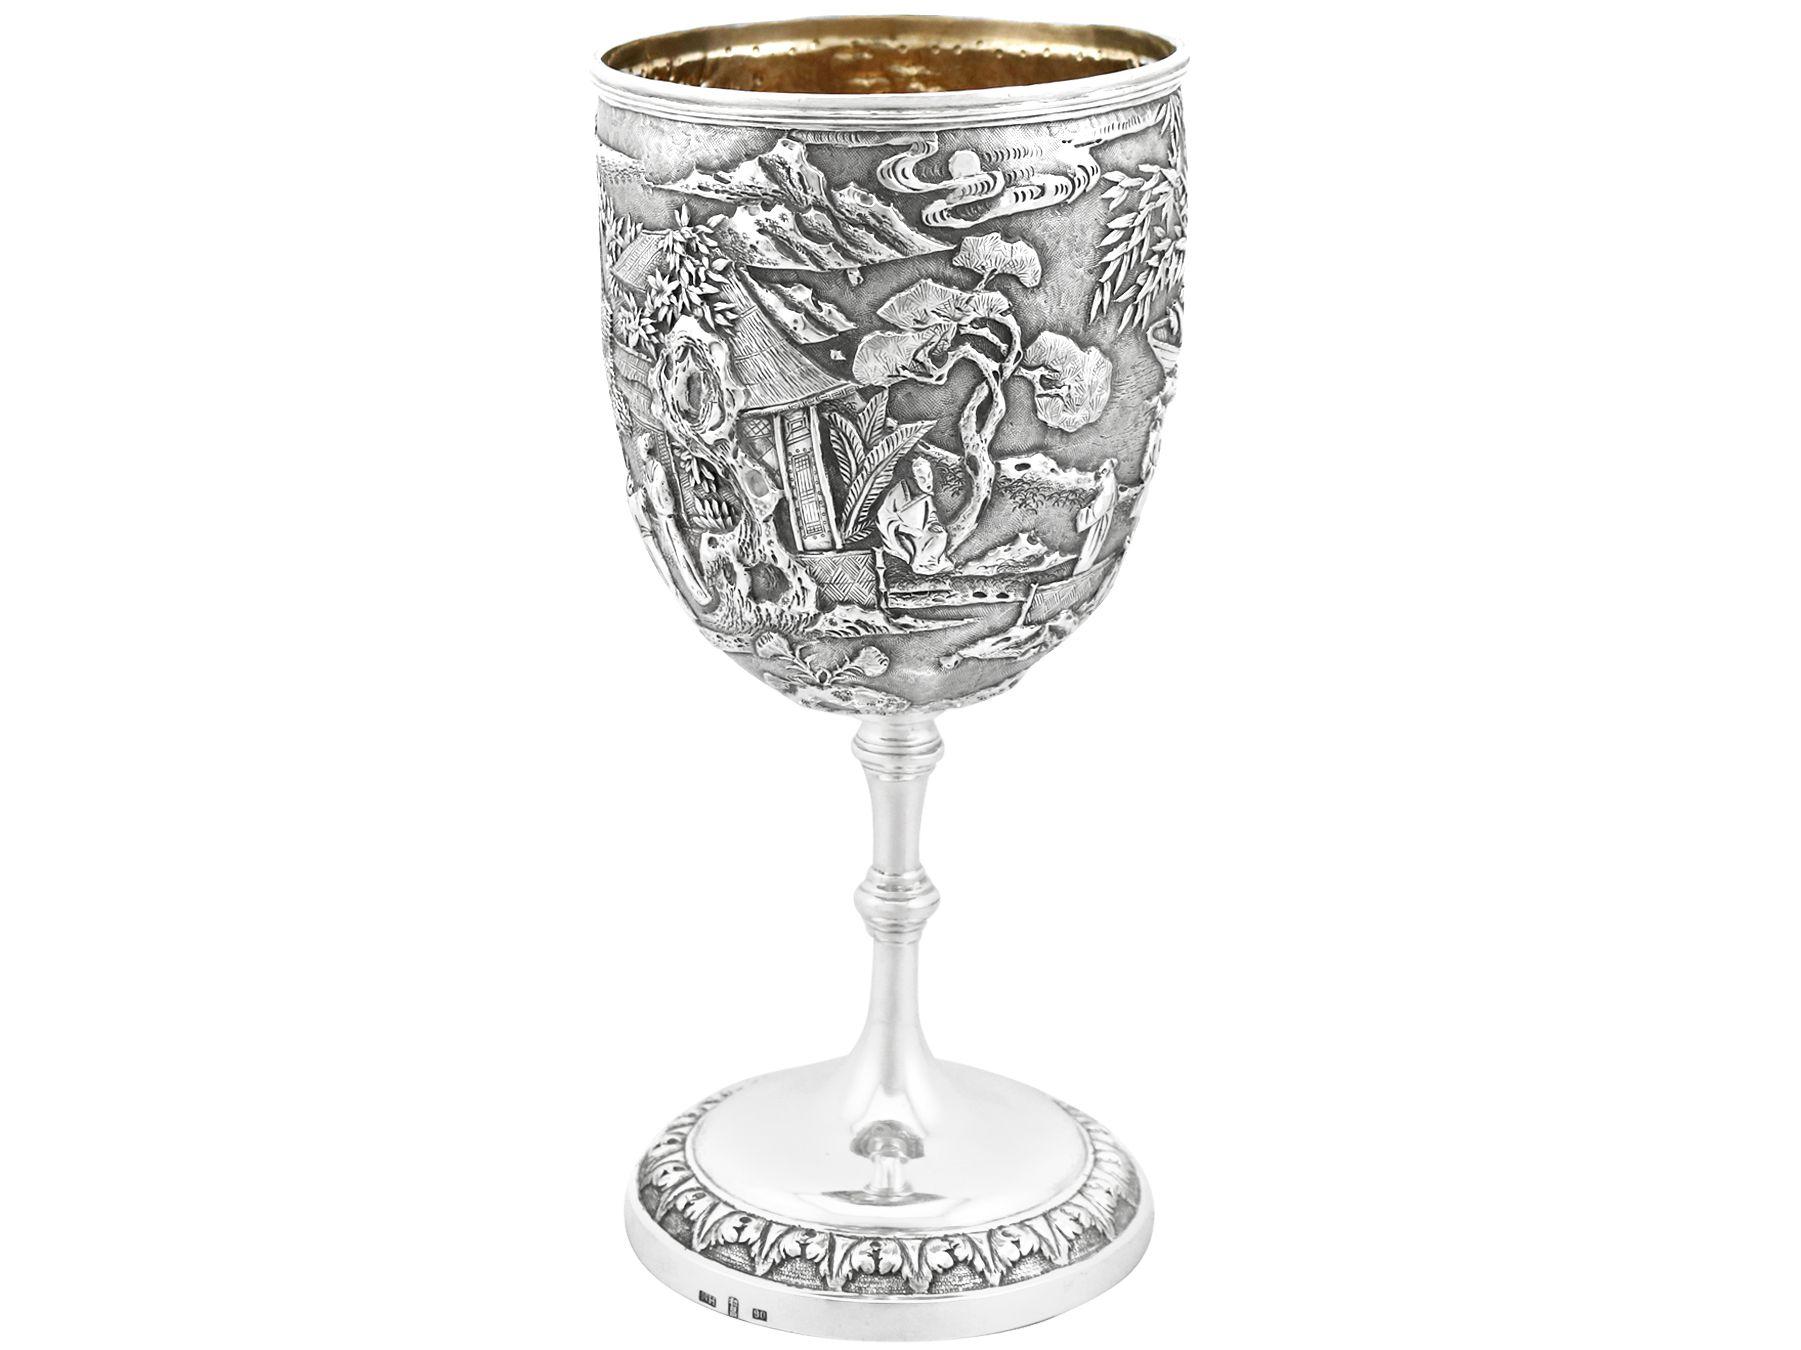 Hong Kong Antique Chinese Export Silver Presentation Cup